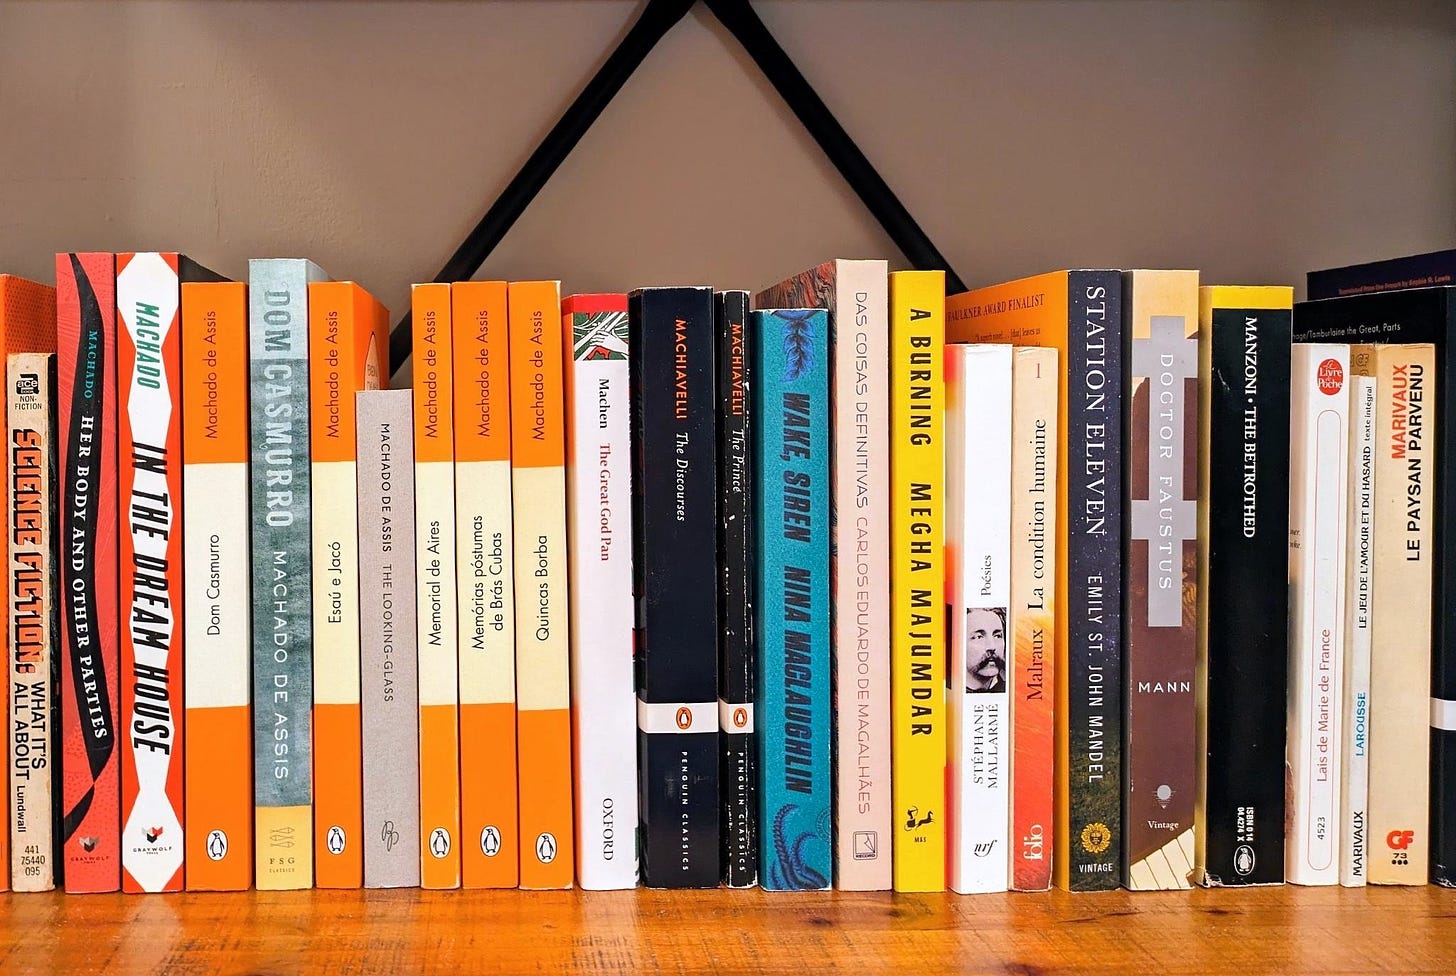 Photo of a section of a bookshelf with various bookspines visible, some in Portuguese, some in French, the majority in English. There's a concentration of bright orange spines at left, all by Machado de Assis.